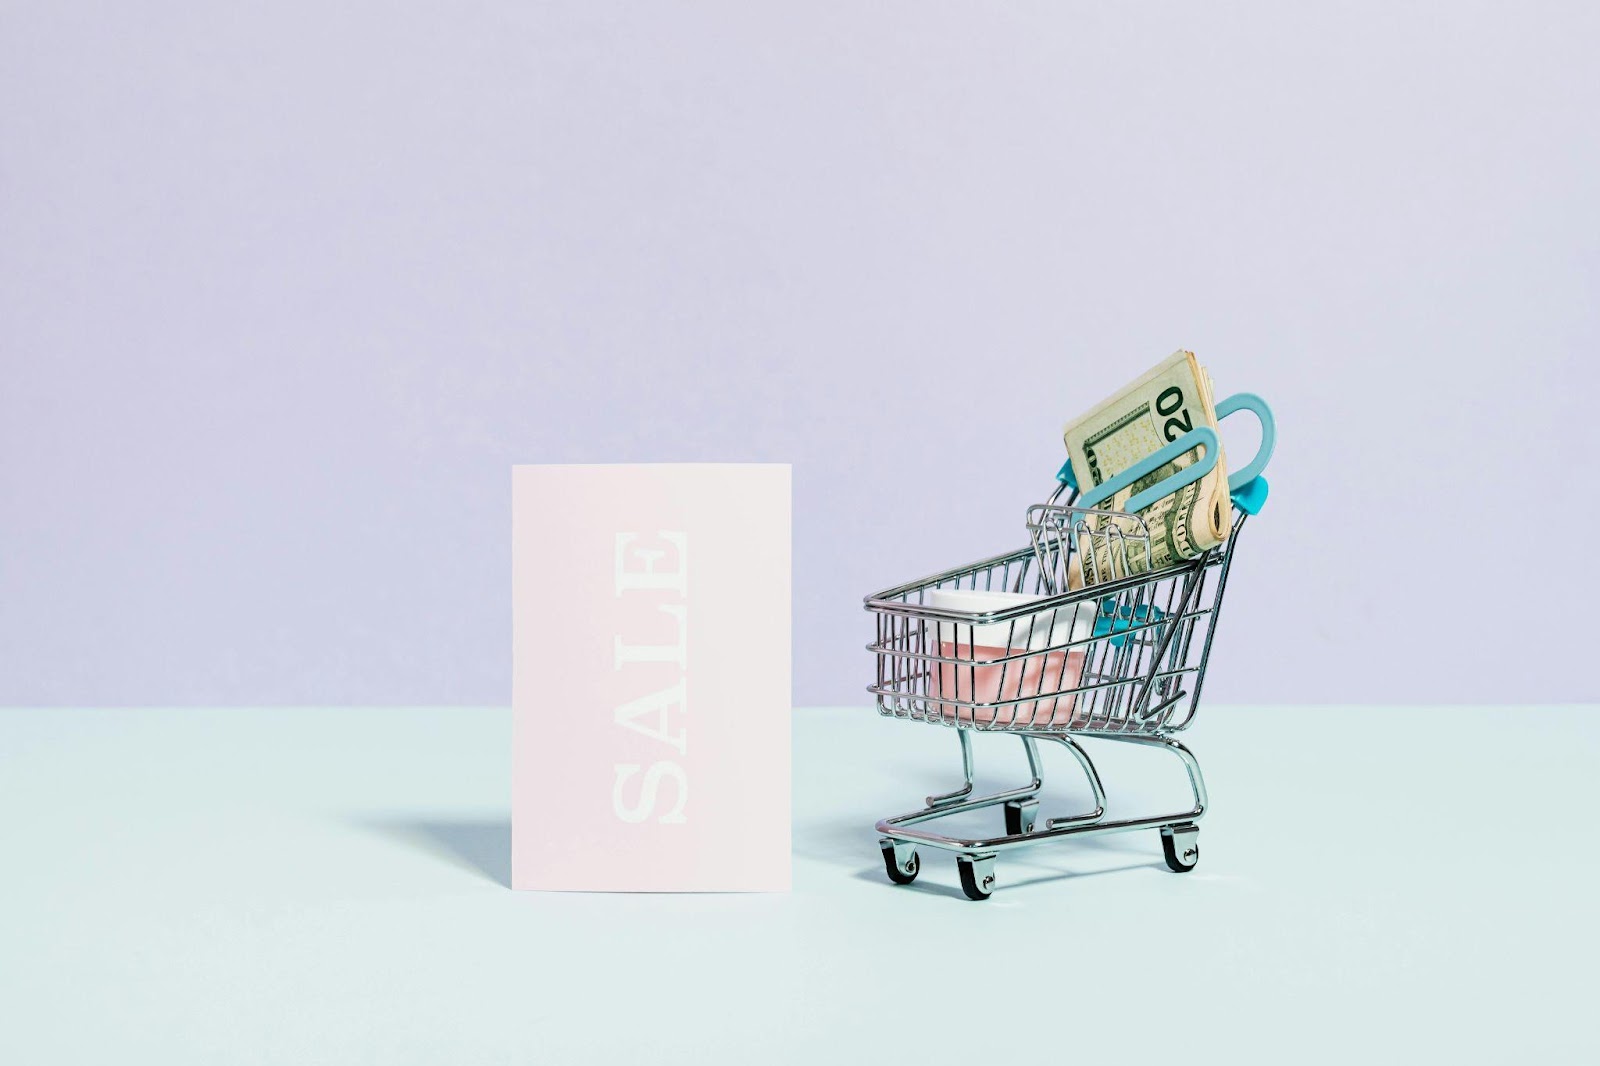 shopping cart and a "sale" sign